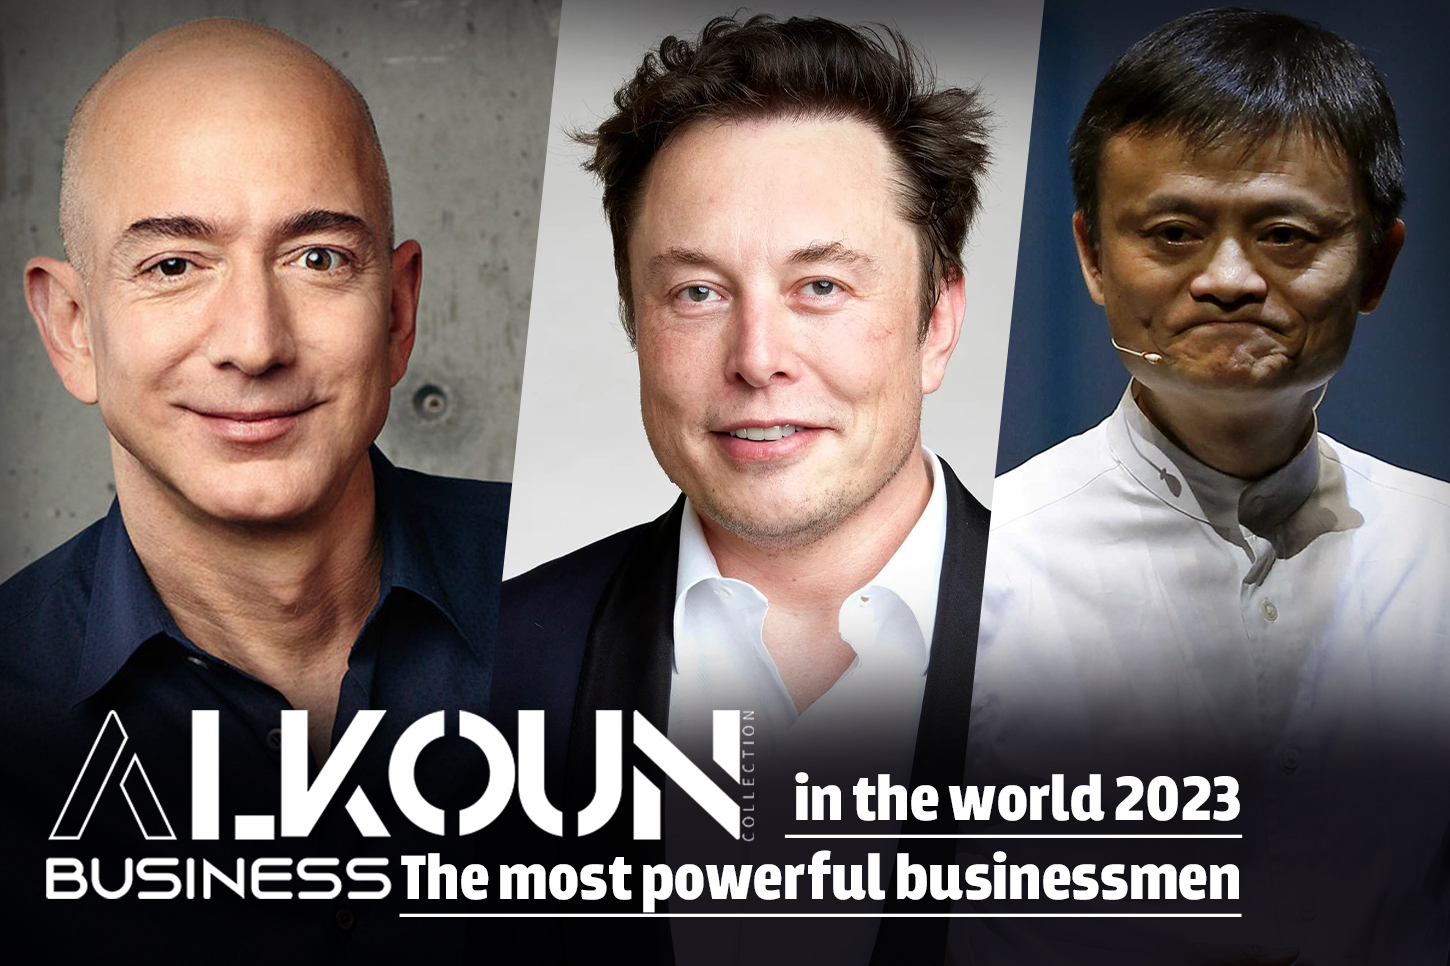 The World's Three Most Powerful Businessmen 2023